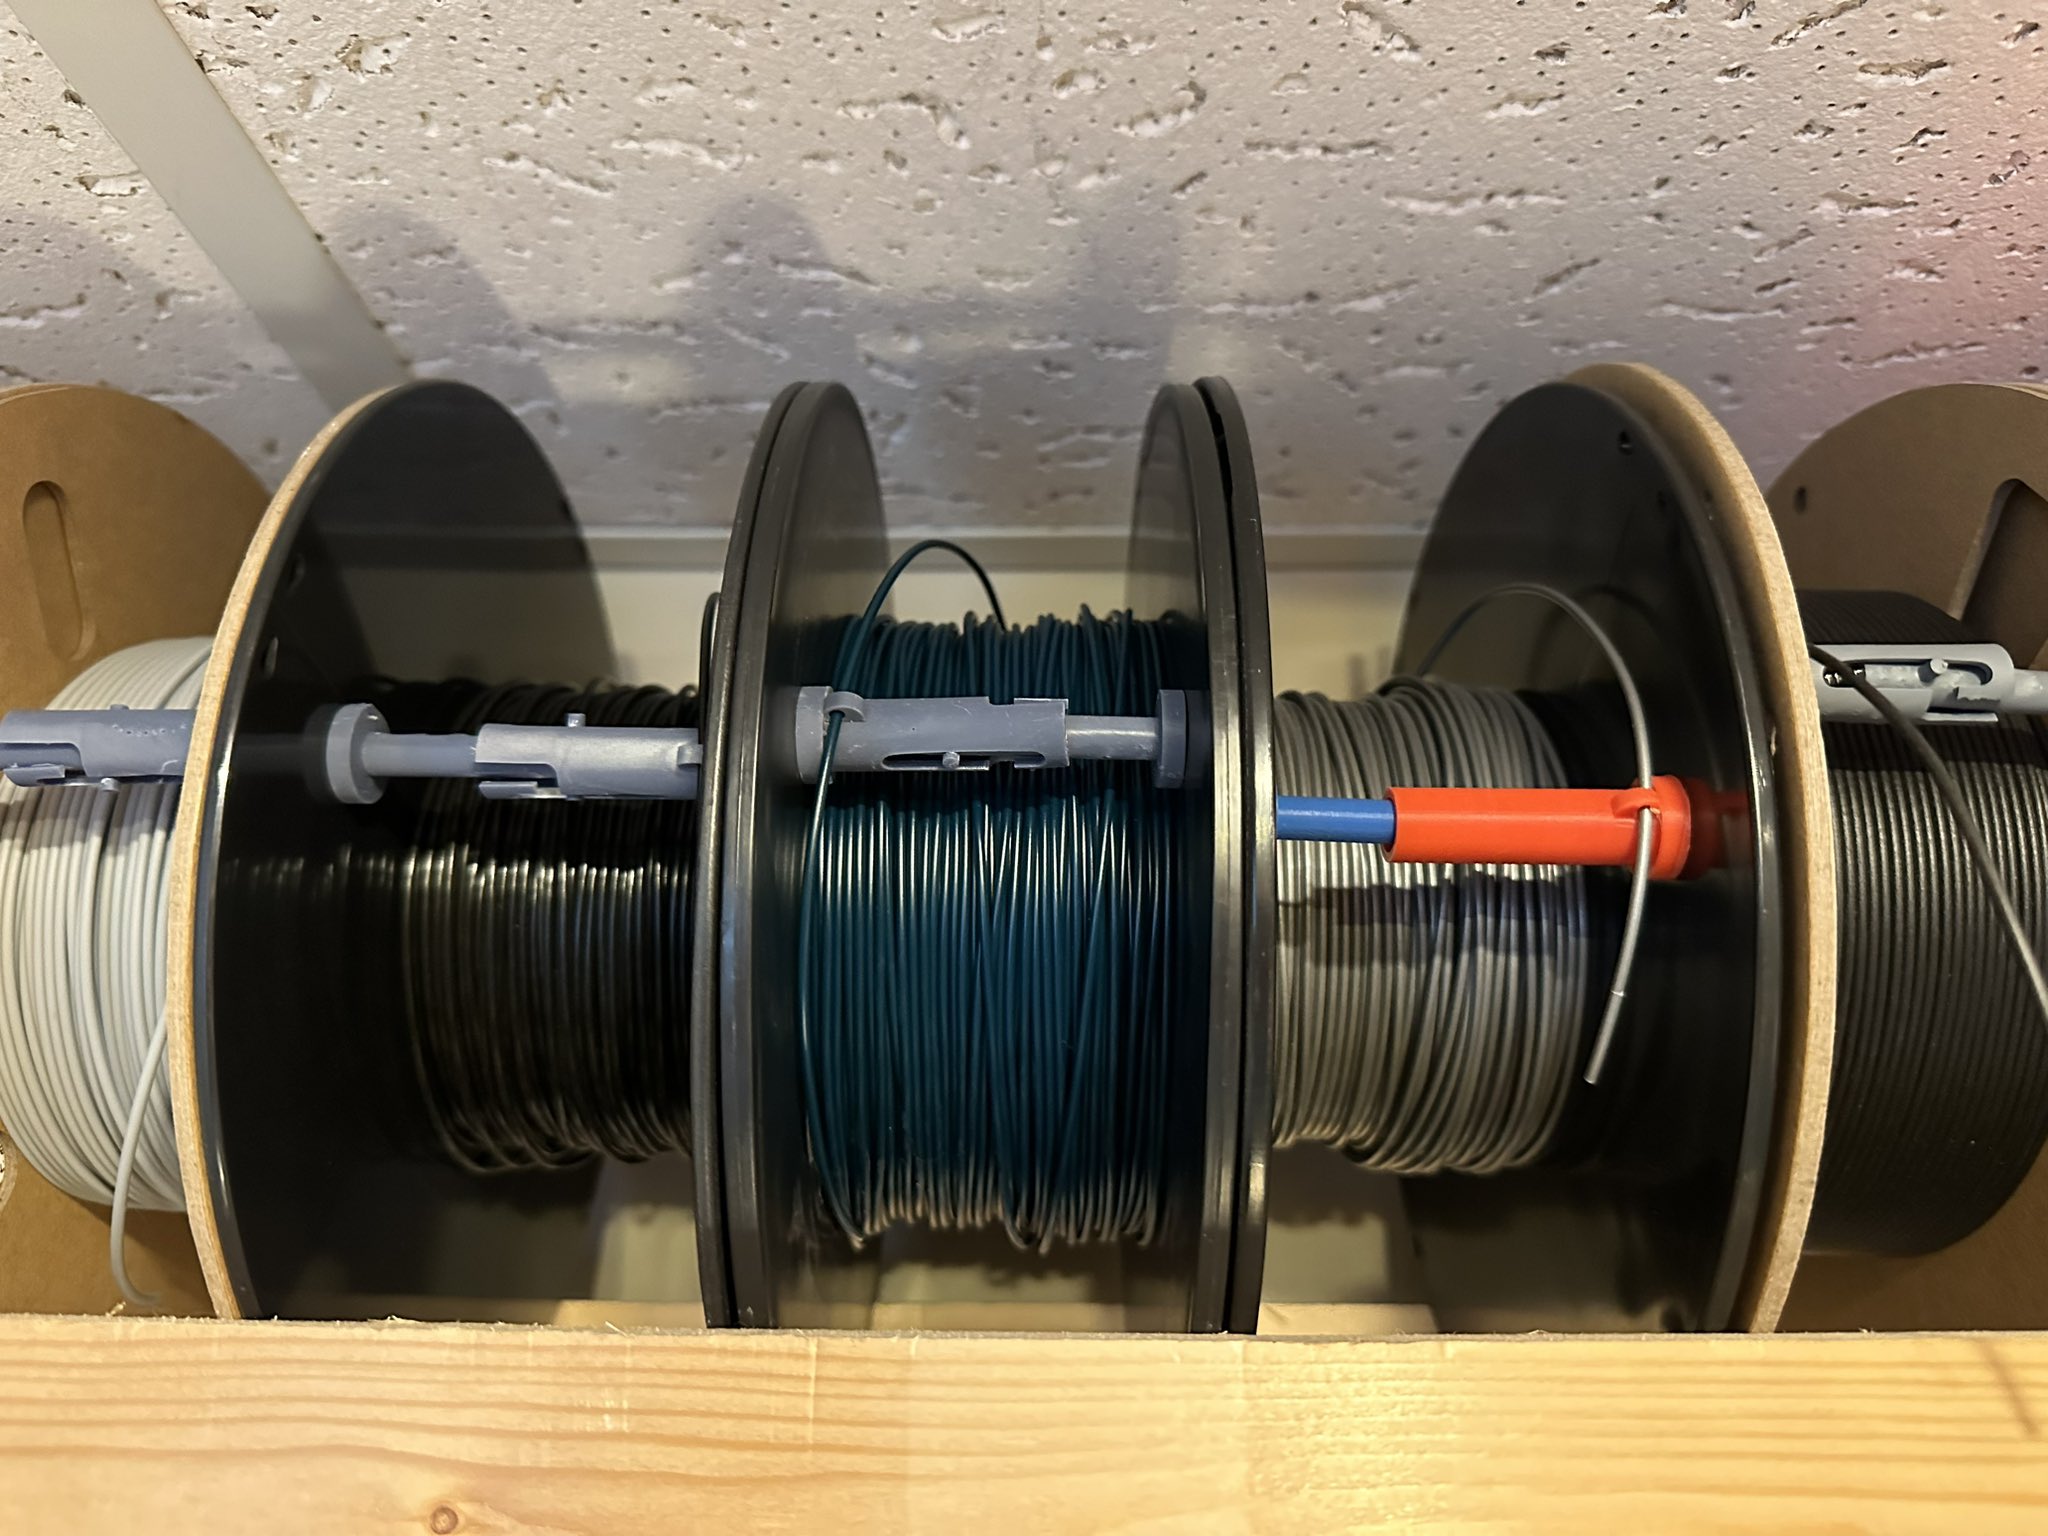 Brian Ibbott on X: Hate broken filament when you're trying to